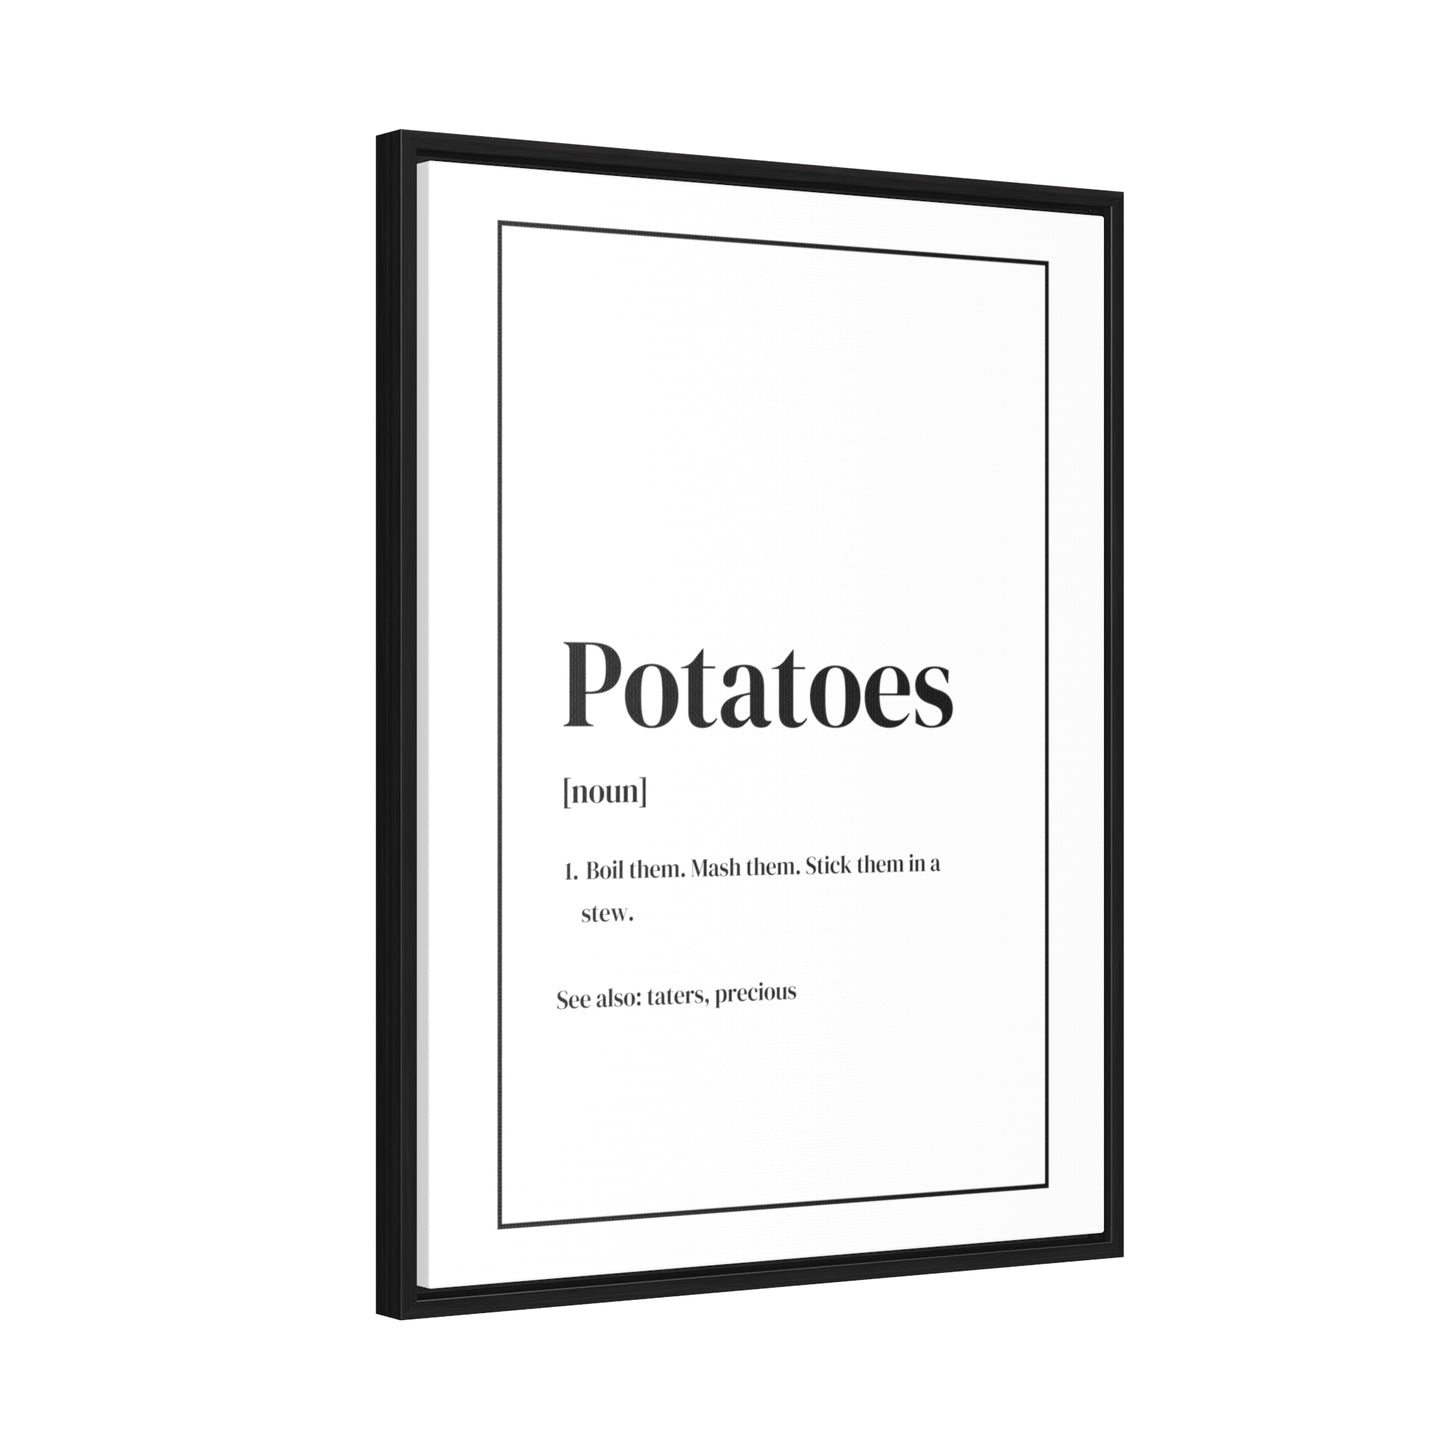 Potatoes Definition Gallery Framed Canvas - Lord of the Rings